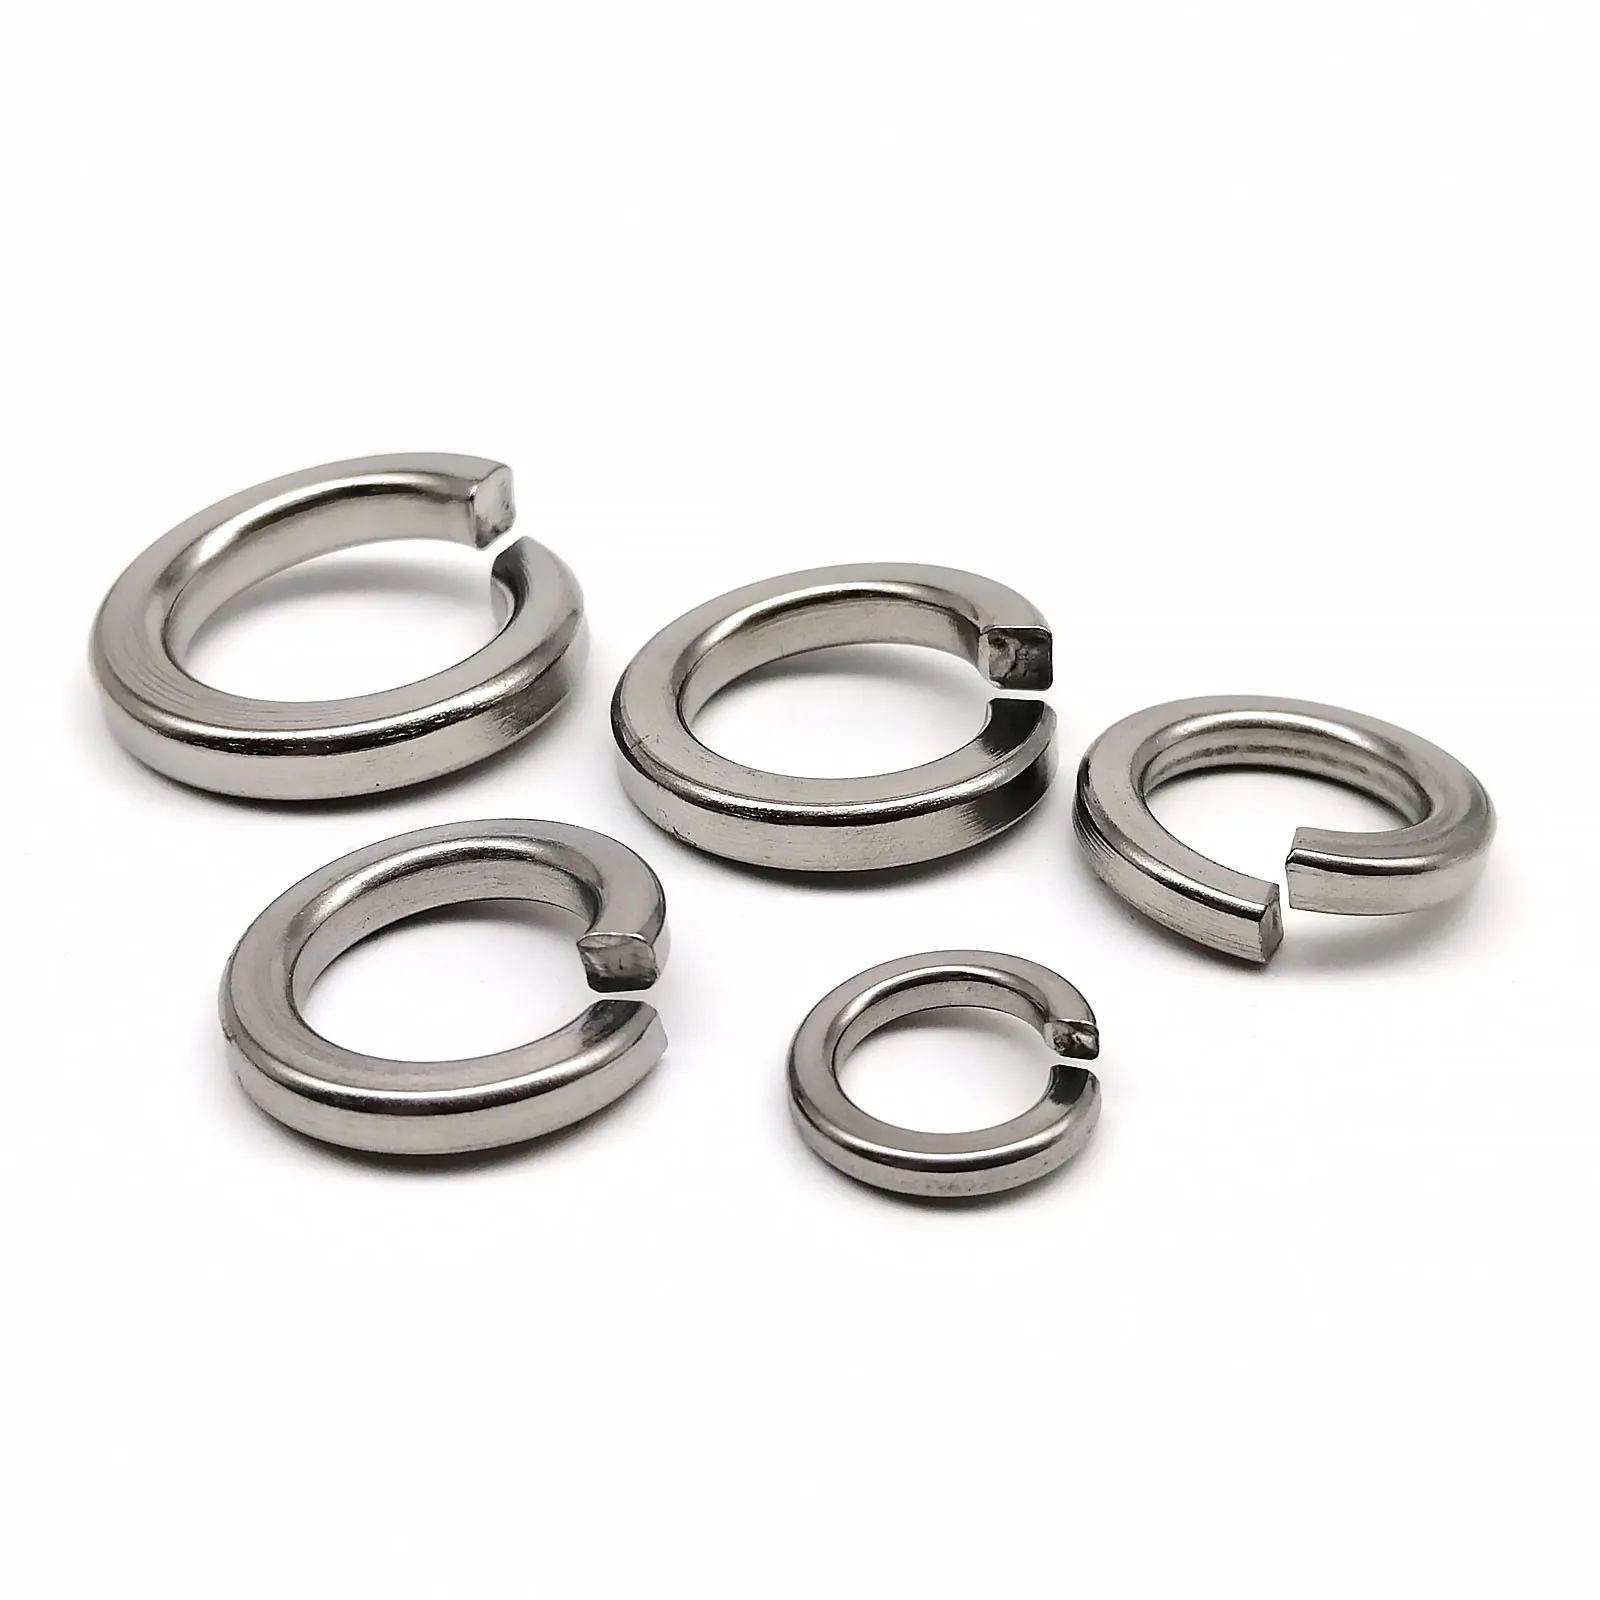 GB93 A2-70 304 Stainless Steel Spring Split Lock Washer Elastic Gasket M1.6 M2 M2.5 M3 M3.5 M4 M5 M6 M8 M10 M12 M14 M16 M20 M24